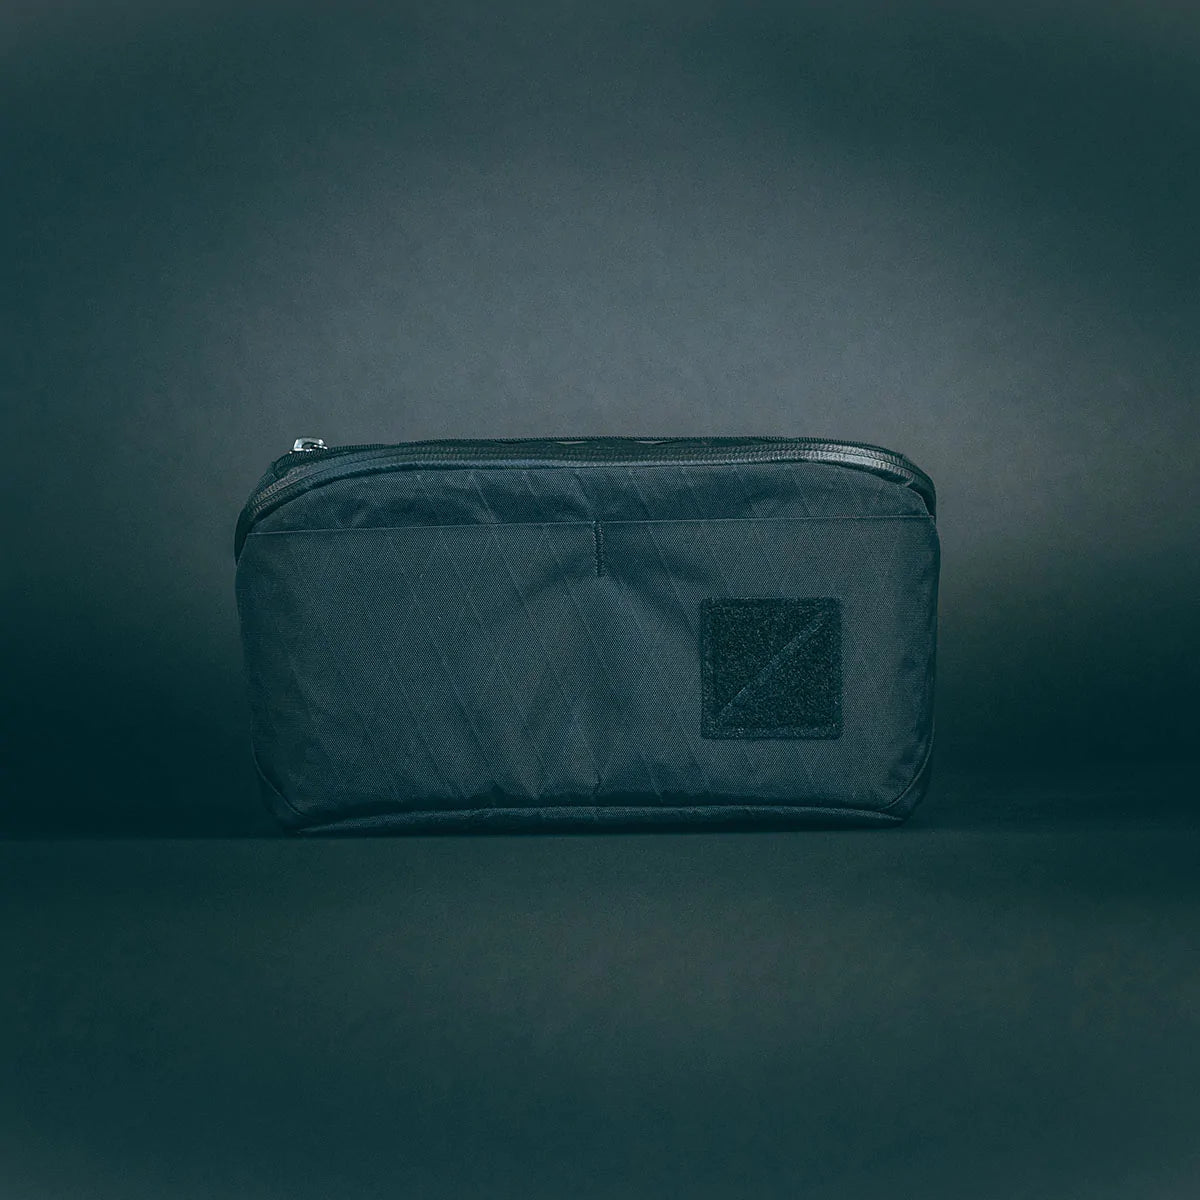 Evergoods X Carryology Civic Access Pouch 2L 鳳凰蛋